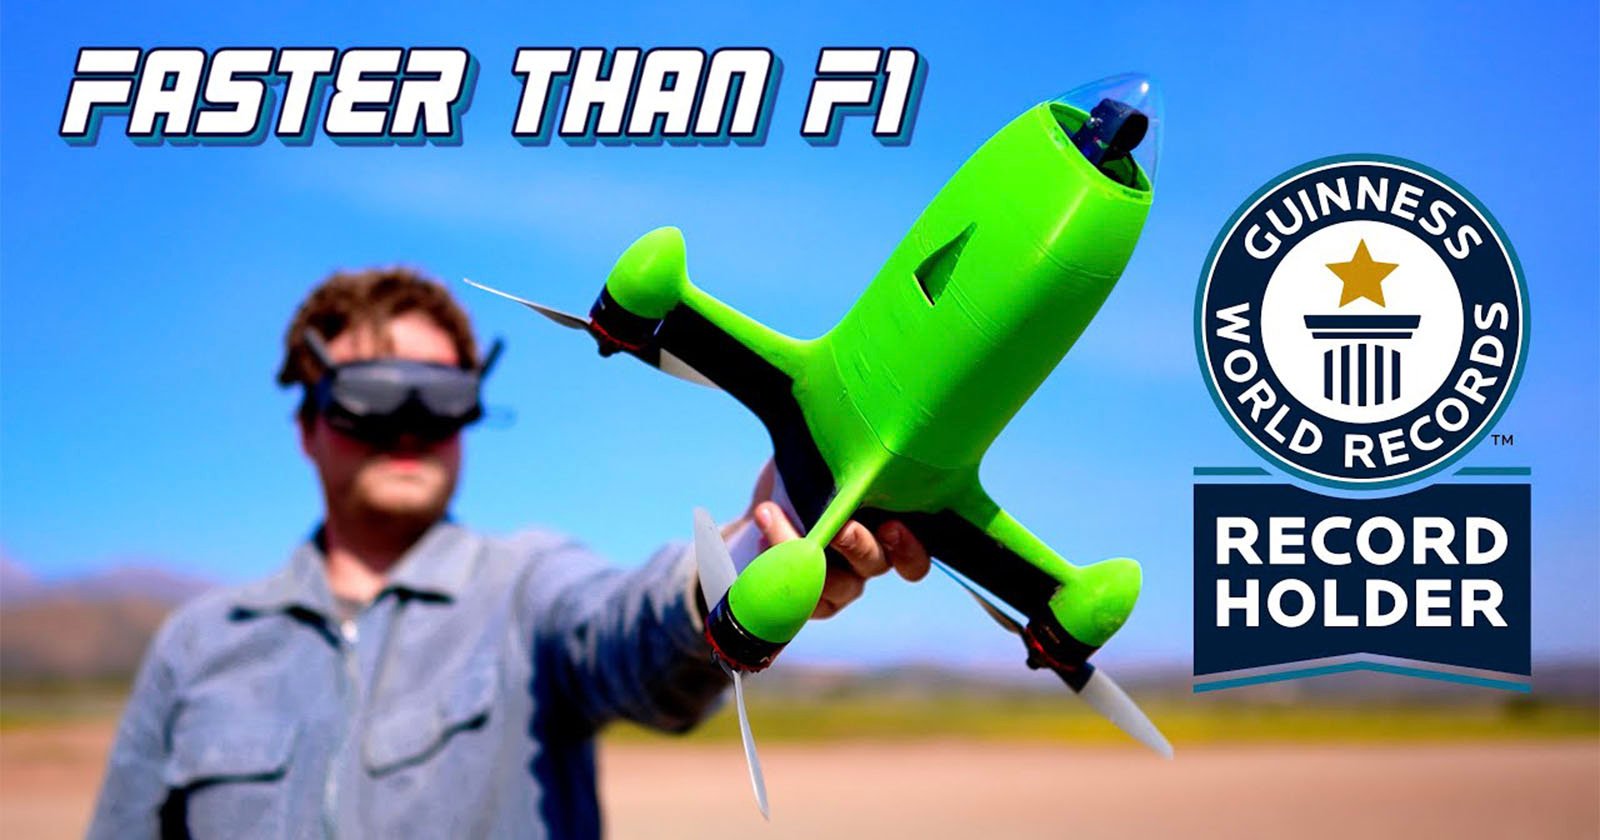 A man wearing a blindfold holds a bright green, rocket-shaped drone with faster than f1 text, outdoors under a clear sky. guinness world records and record holder logos are displayed.